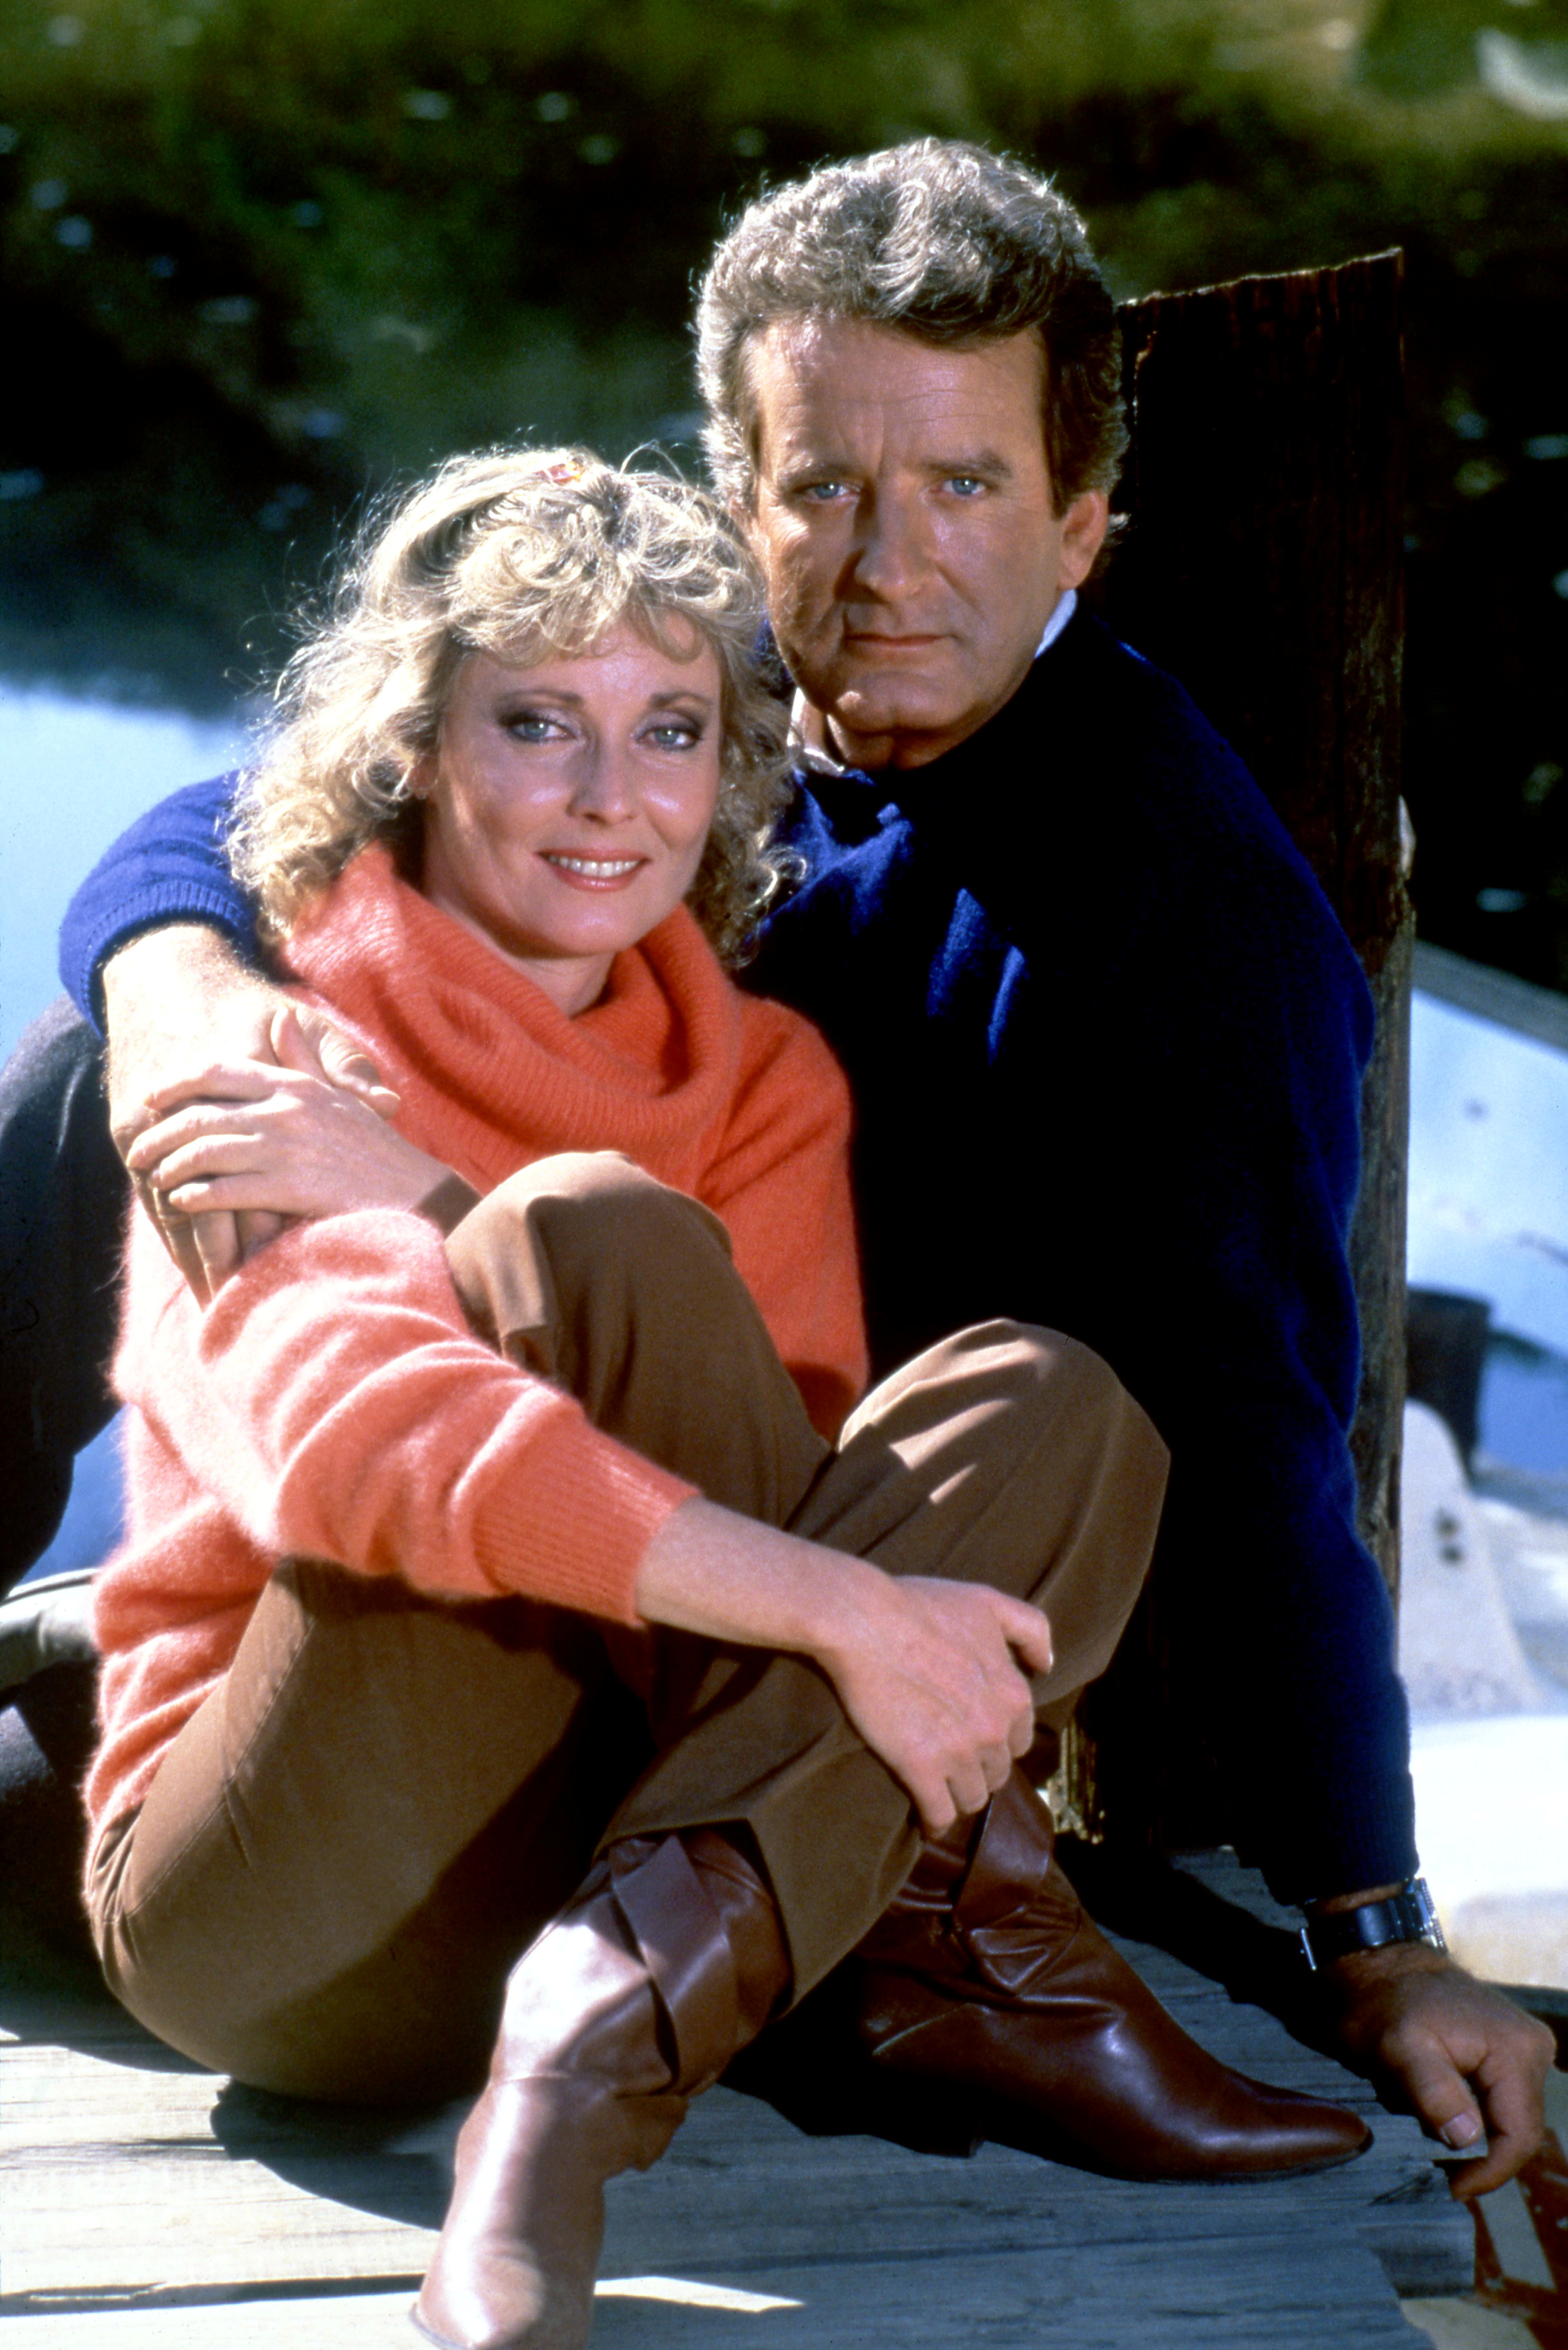 Nicolas Coster and Judith McConnell of the American television soap opera "Santa Barbara", pose for a portrait in Los Angeles, California, circa 1986. | Source: Getty Images